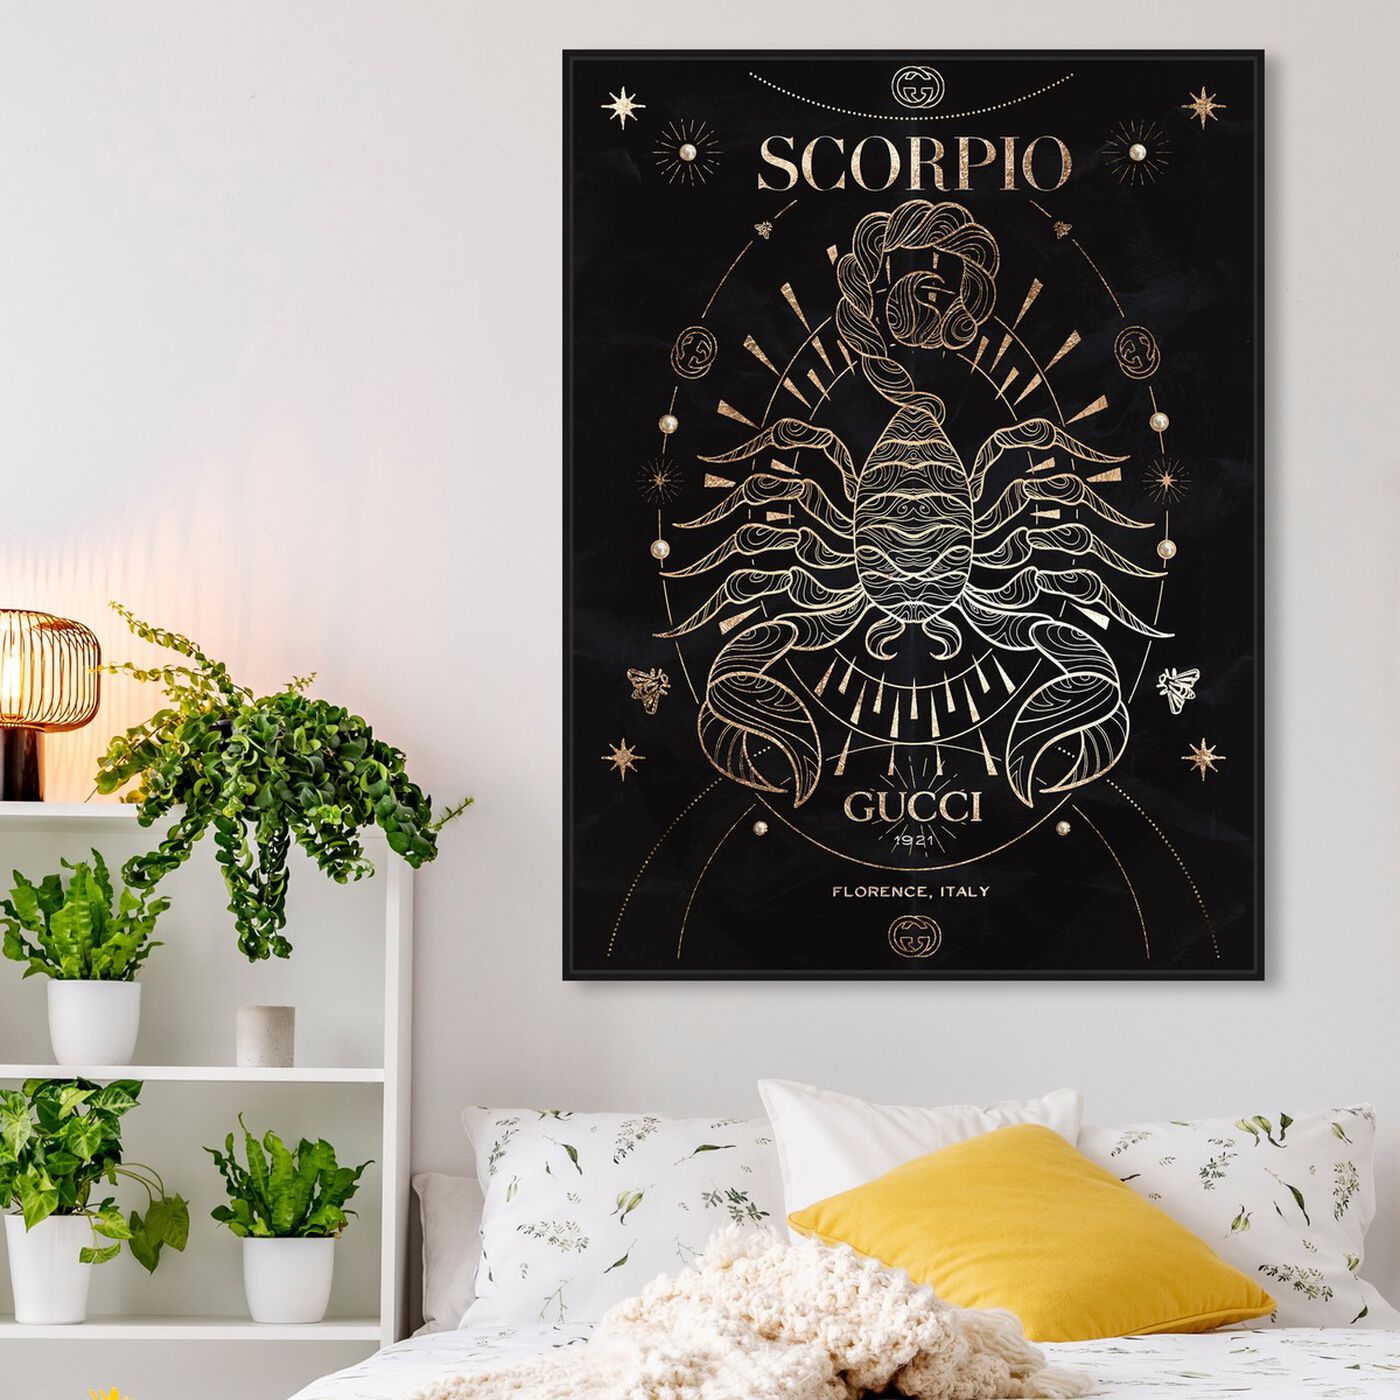 Hanging view of Mémoire d'un Scorpio featuring fashion and glam and lifestyle art.